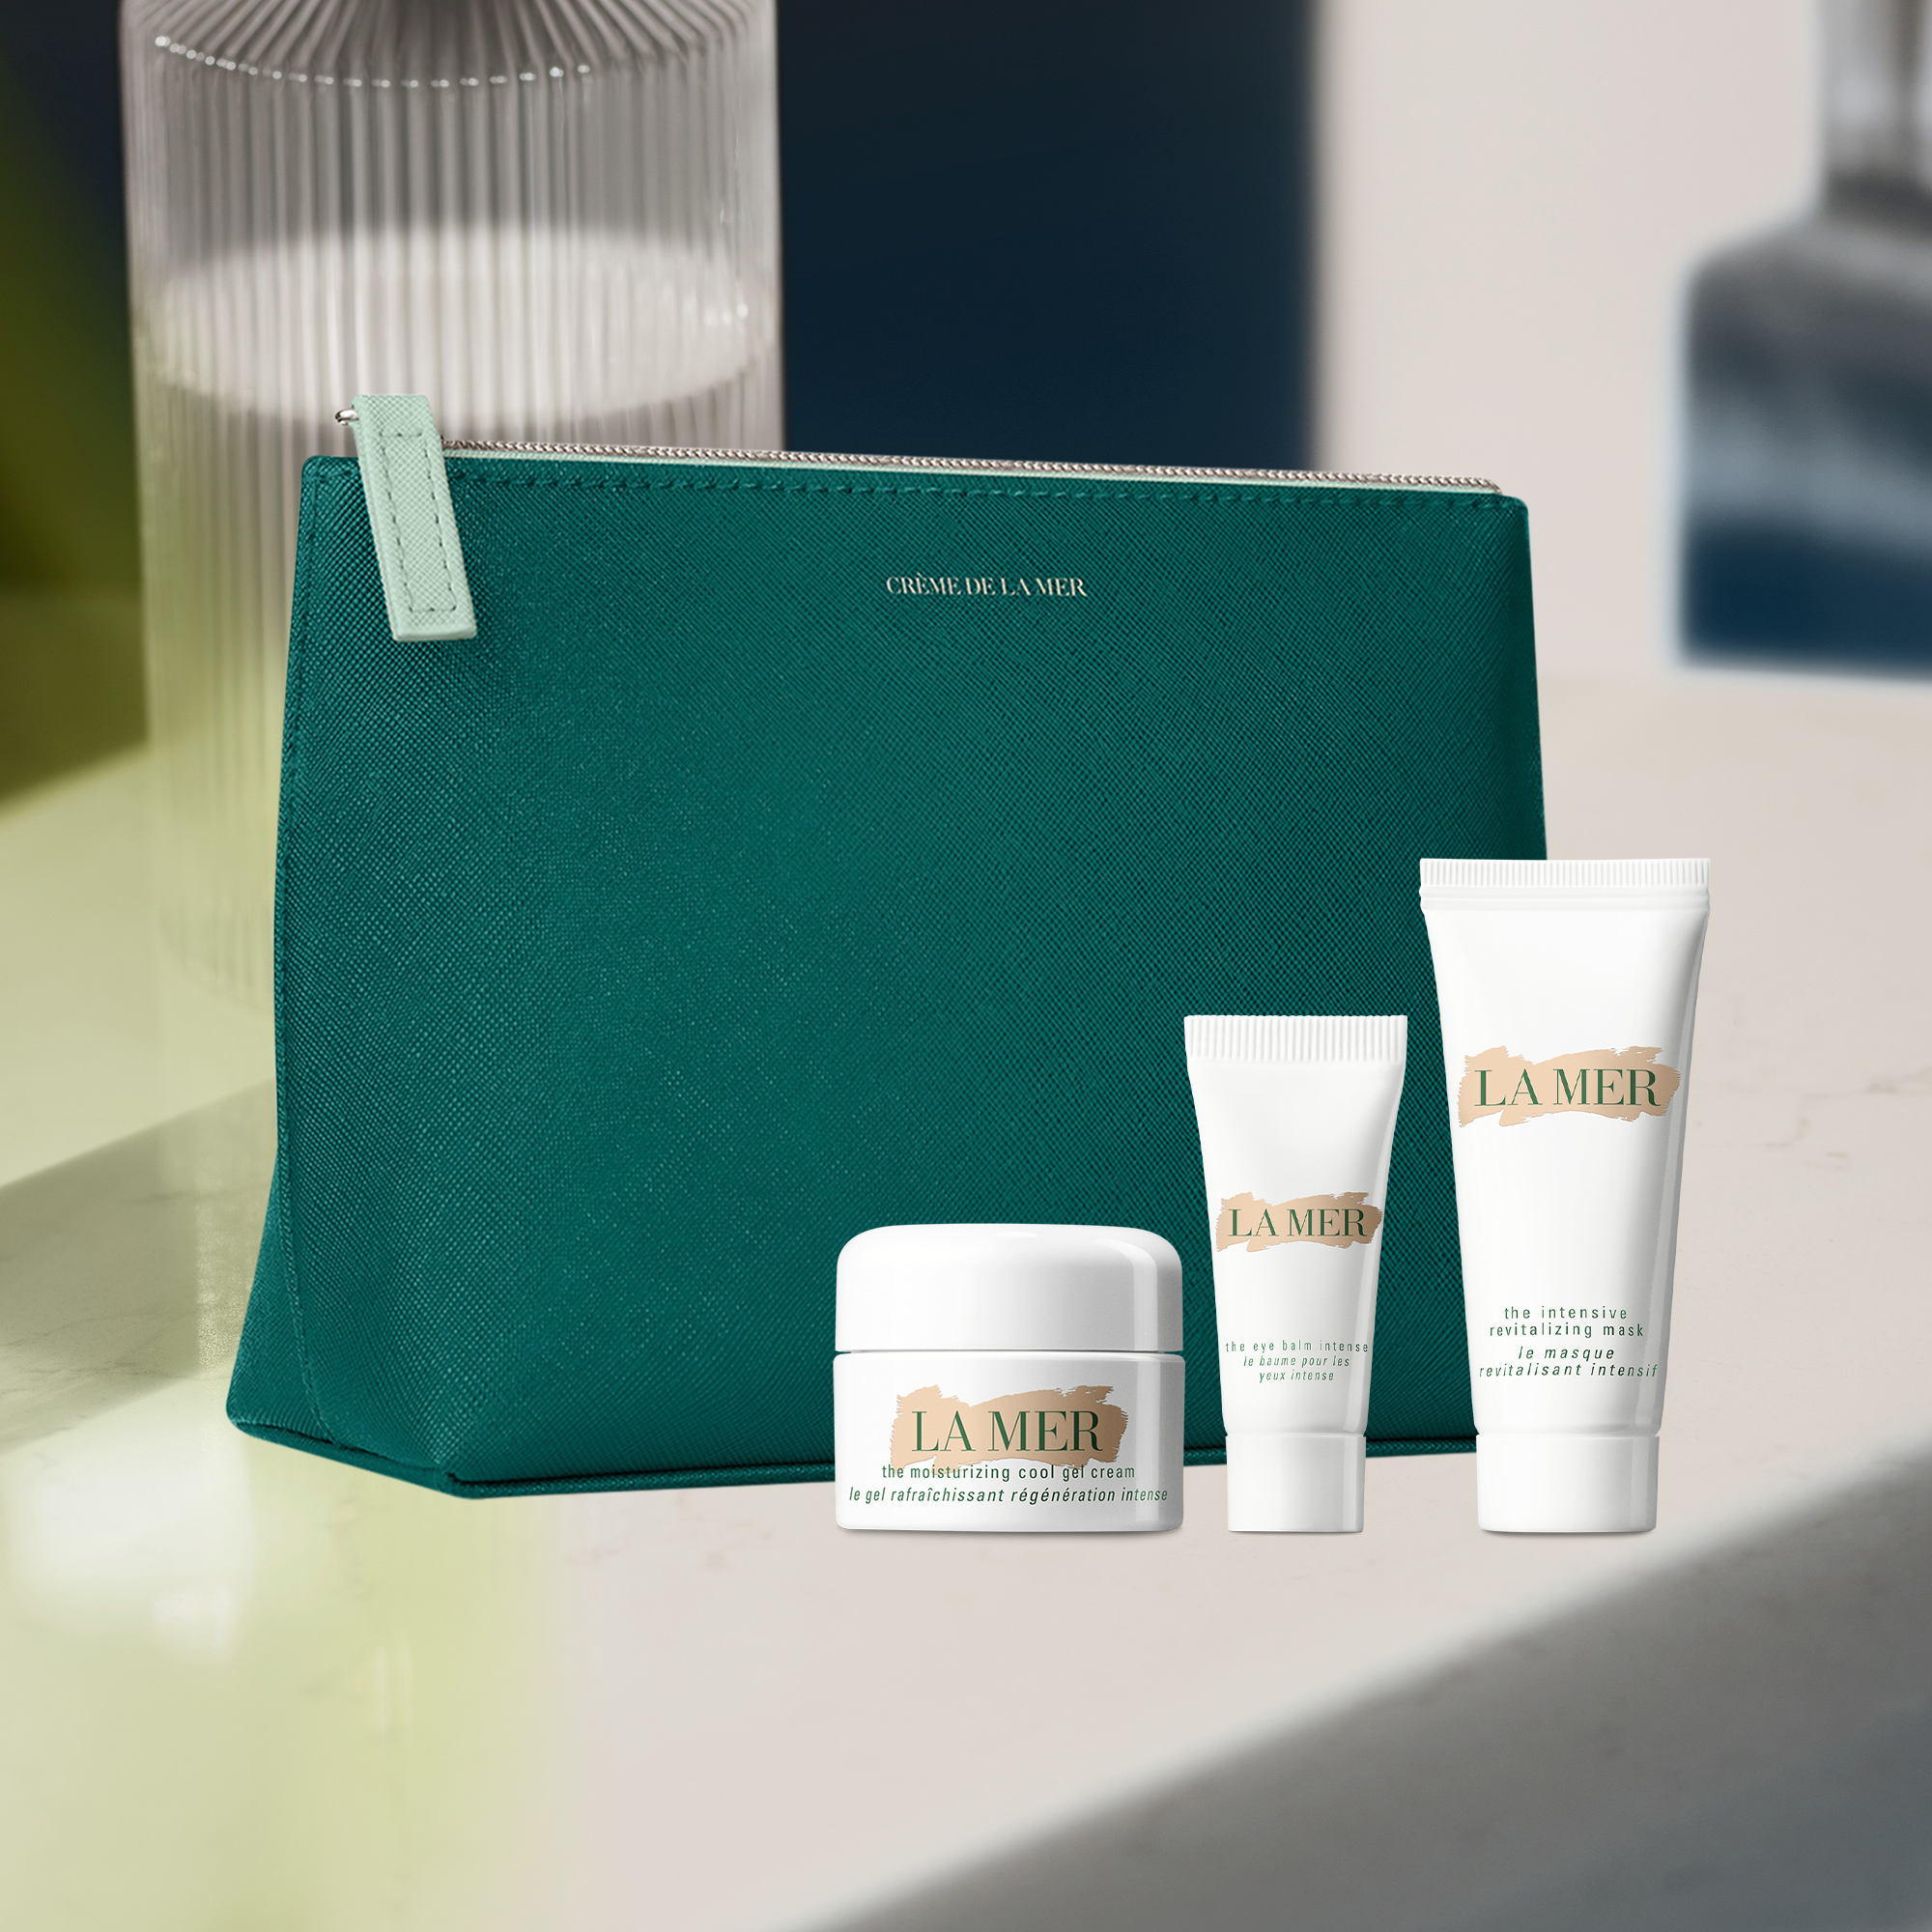 Spend €300 in La Mer & Receive Complimentary Gift